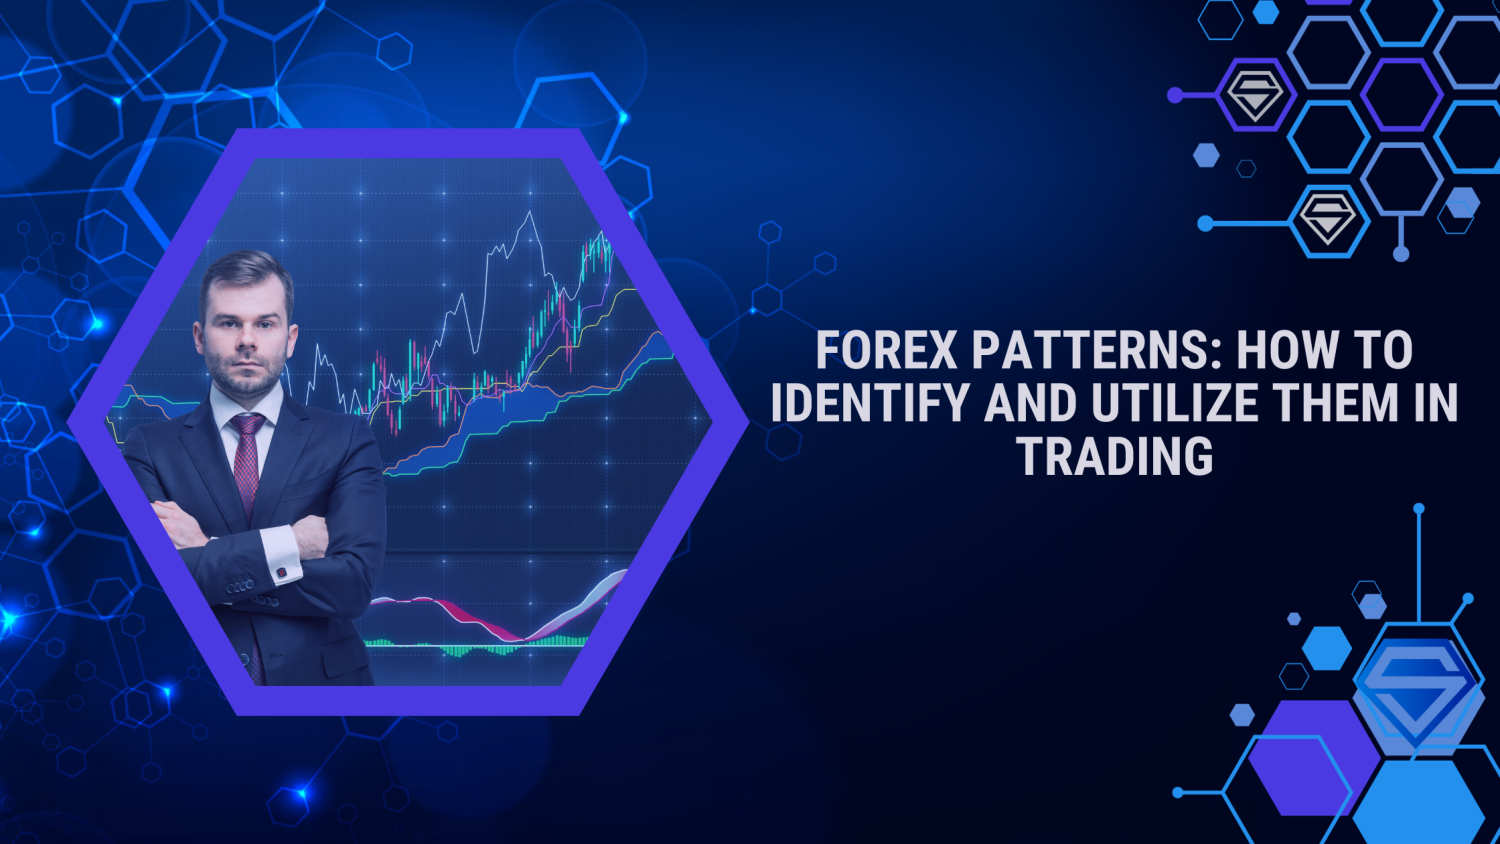 Forex Patterns: How to Identify and Utilize Them in Trading